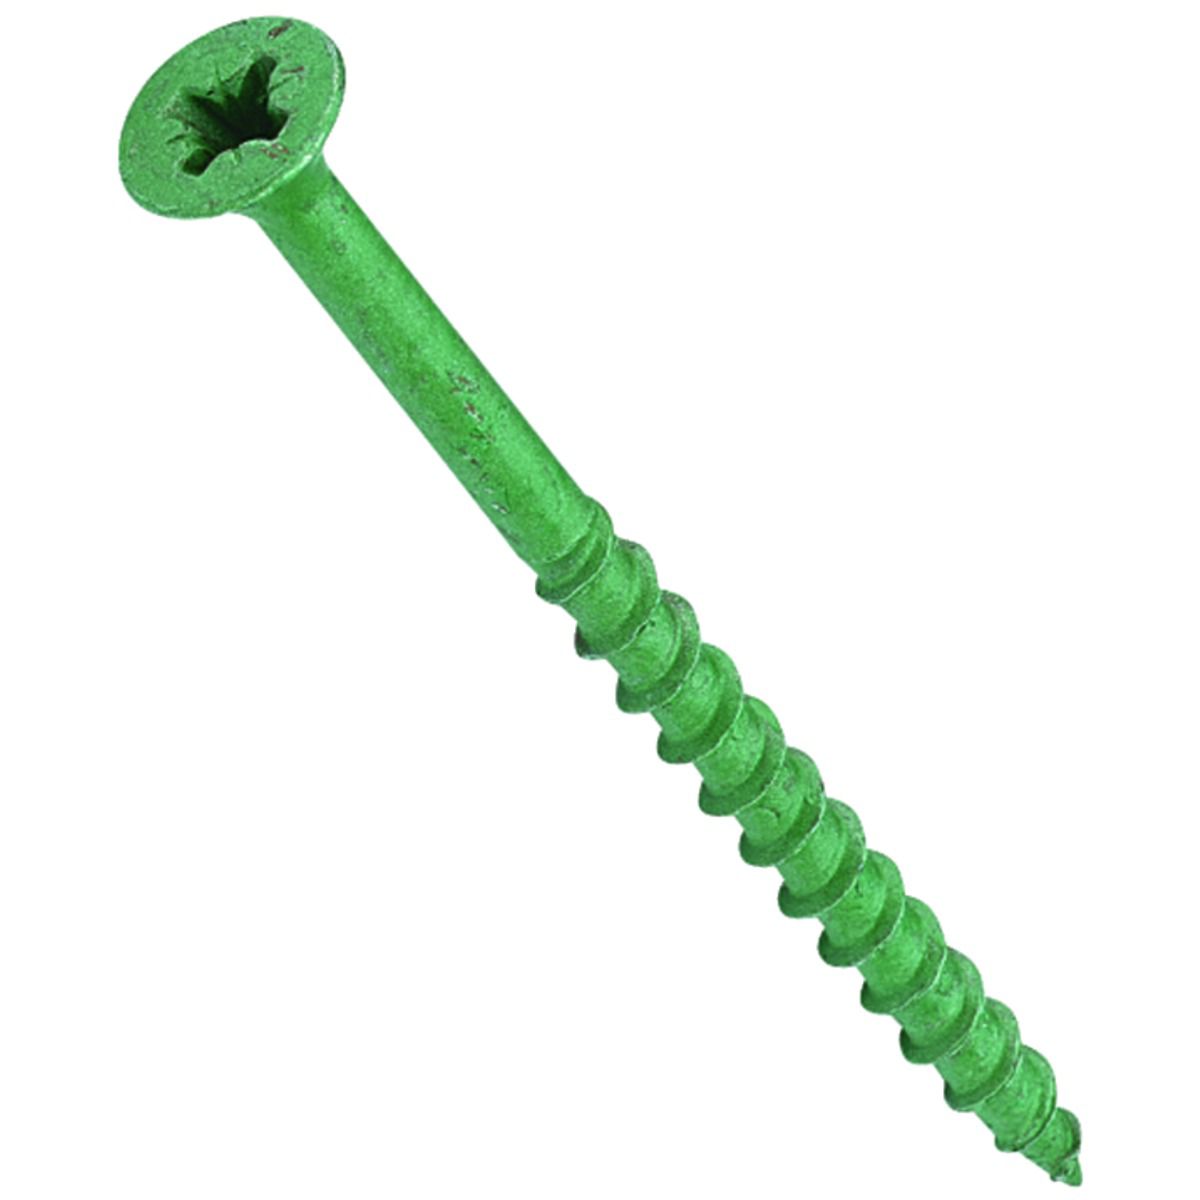 Image of Wickes External Grade Screw - Green No 8 x 19mm Pack of 25